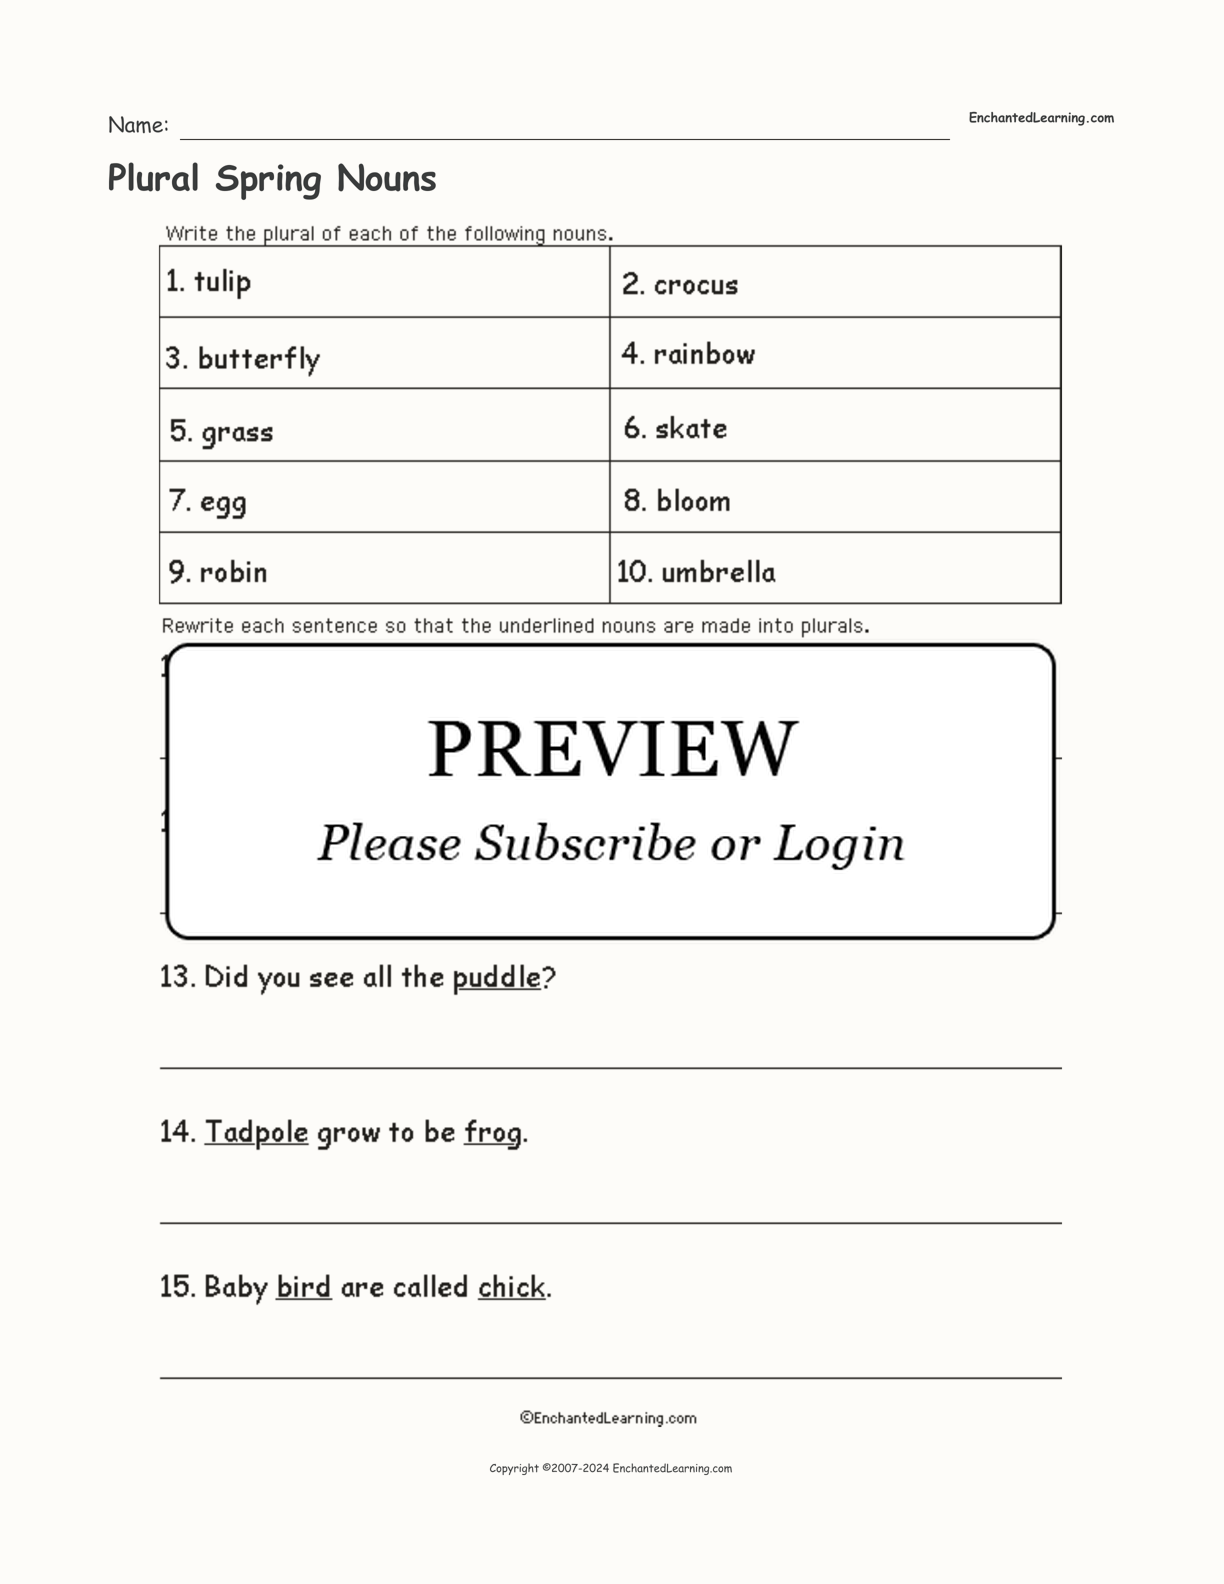 Plural Spring Nouns interactive worksheet page 1